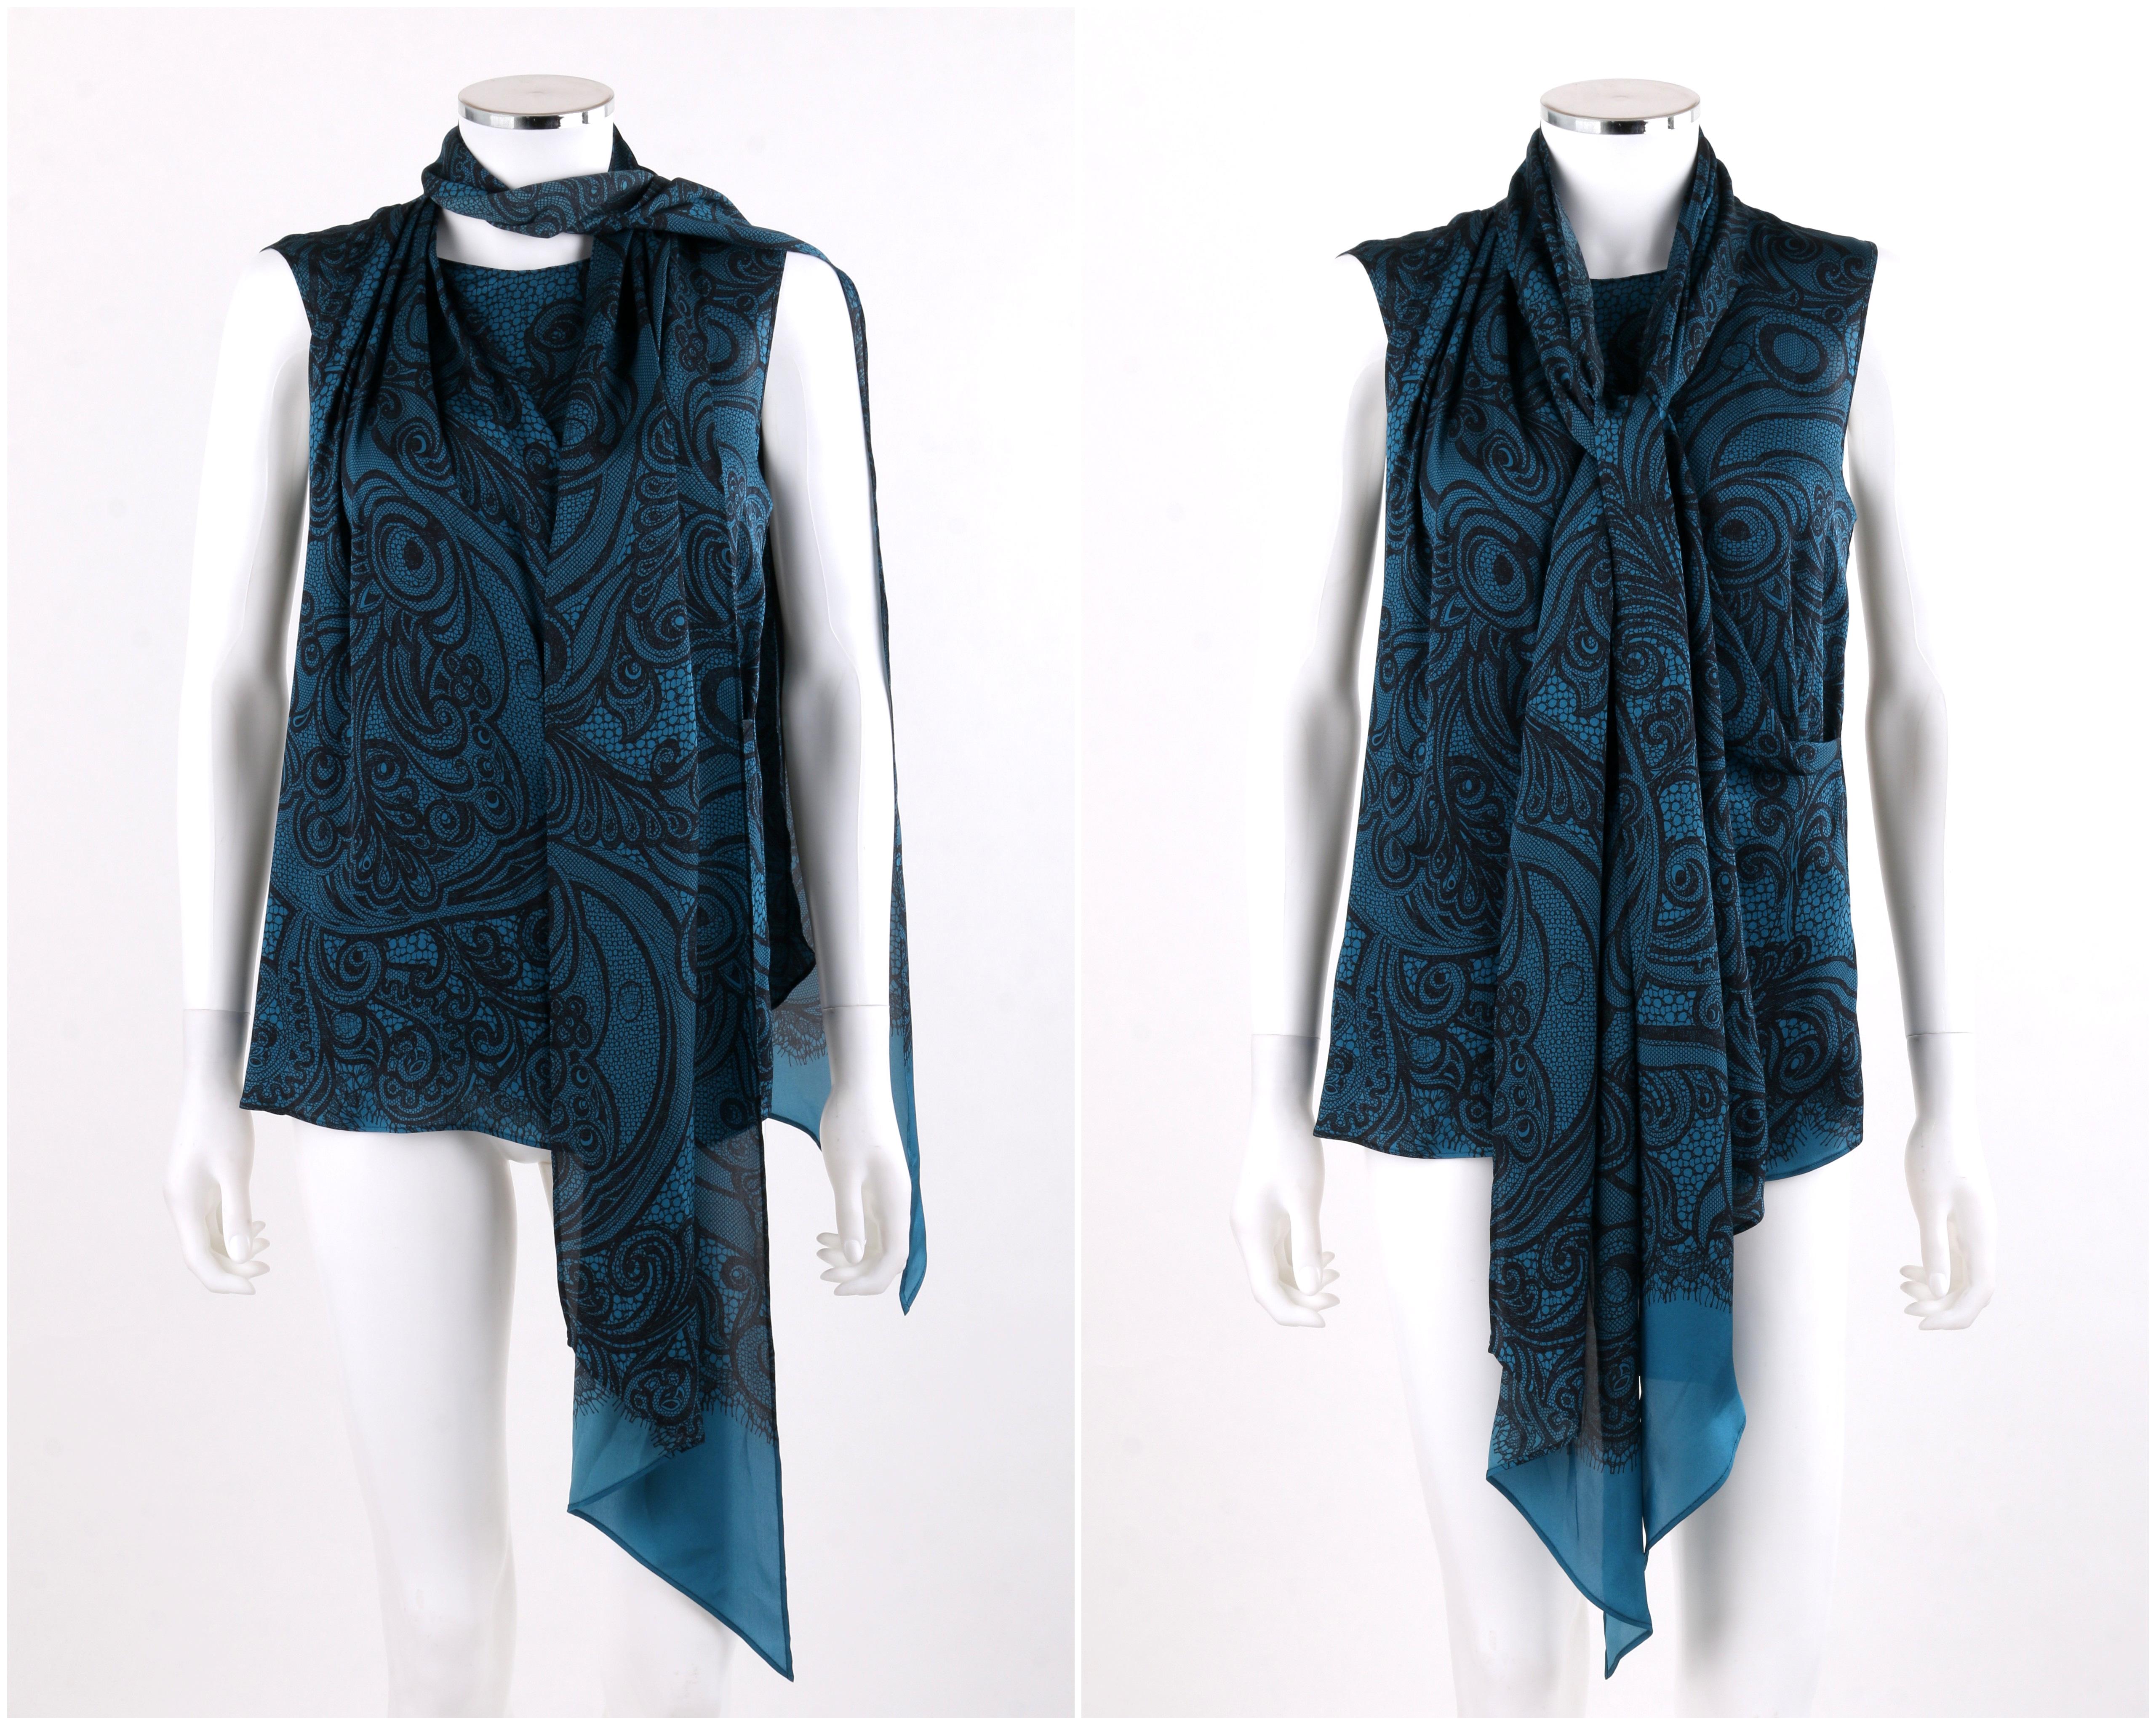 Women's EMILIO PUCCI Teal Black Lace Print Sleeveless Silk Wrap Style Blouse Scarf Belt For Sale